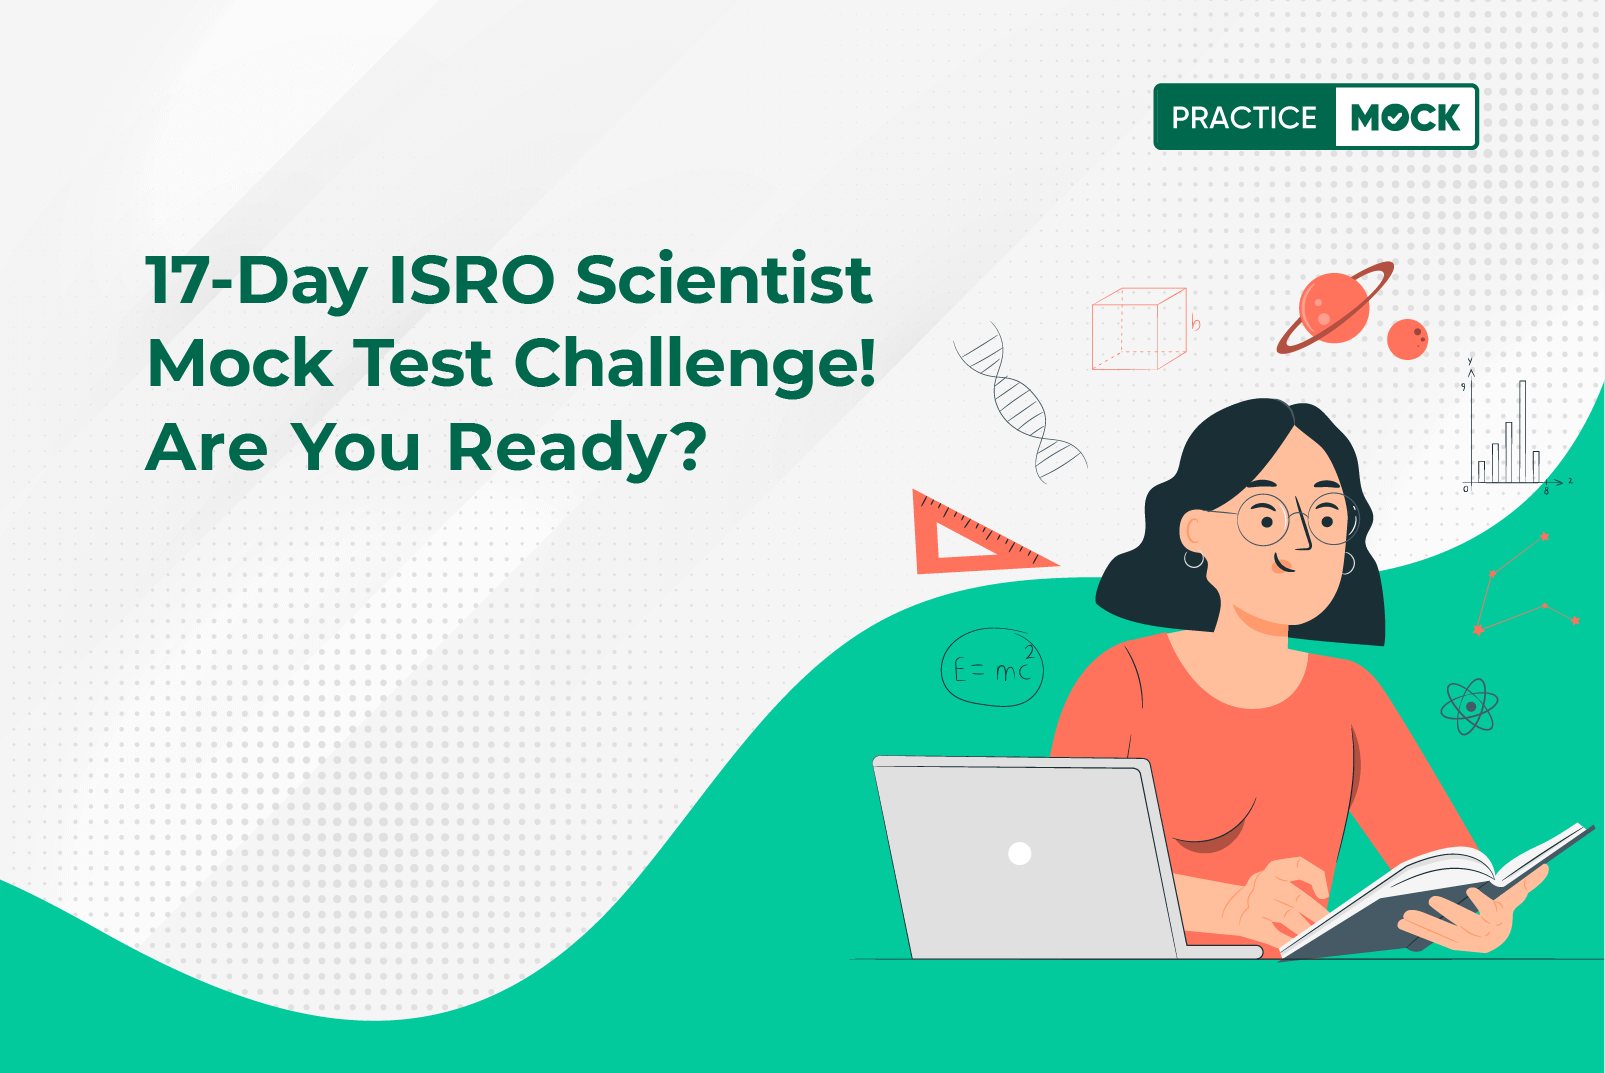 17-Day ISRO Scientist Mock Test Challenge! Are you ready?